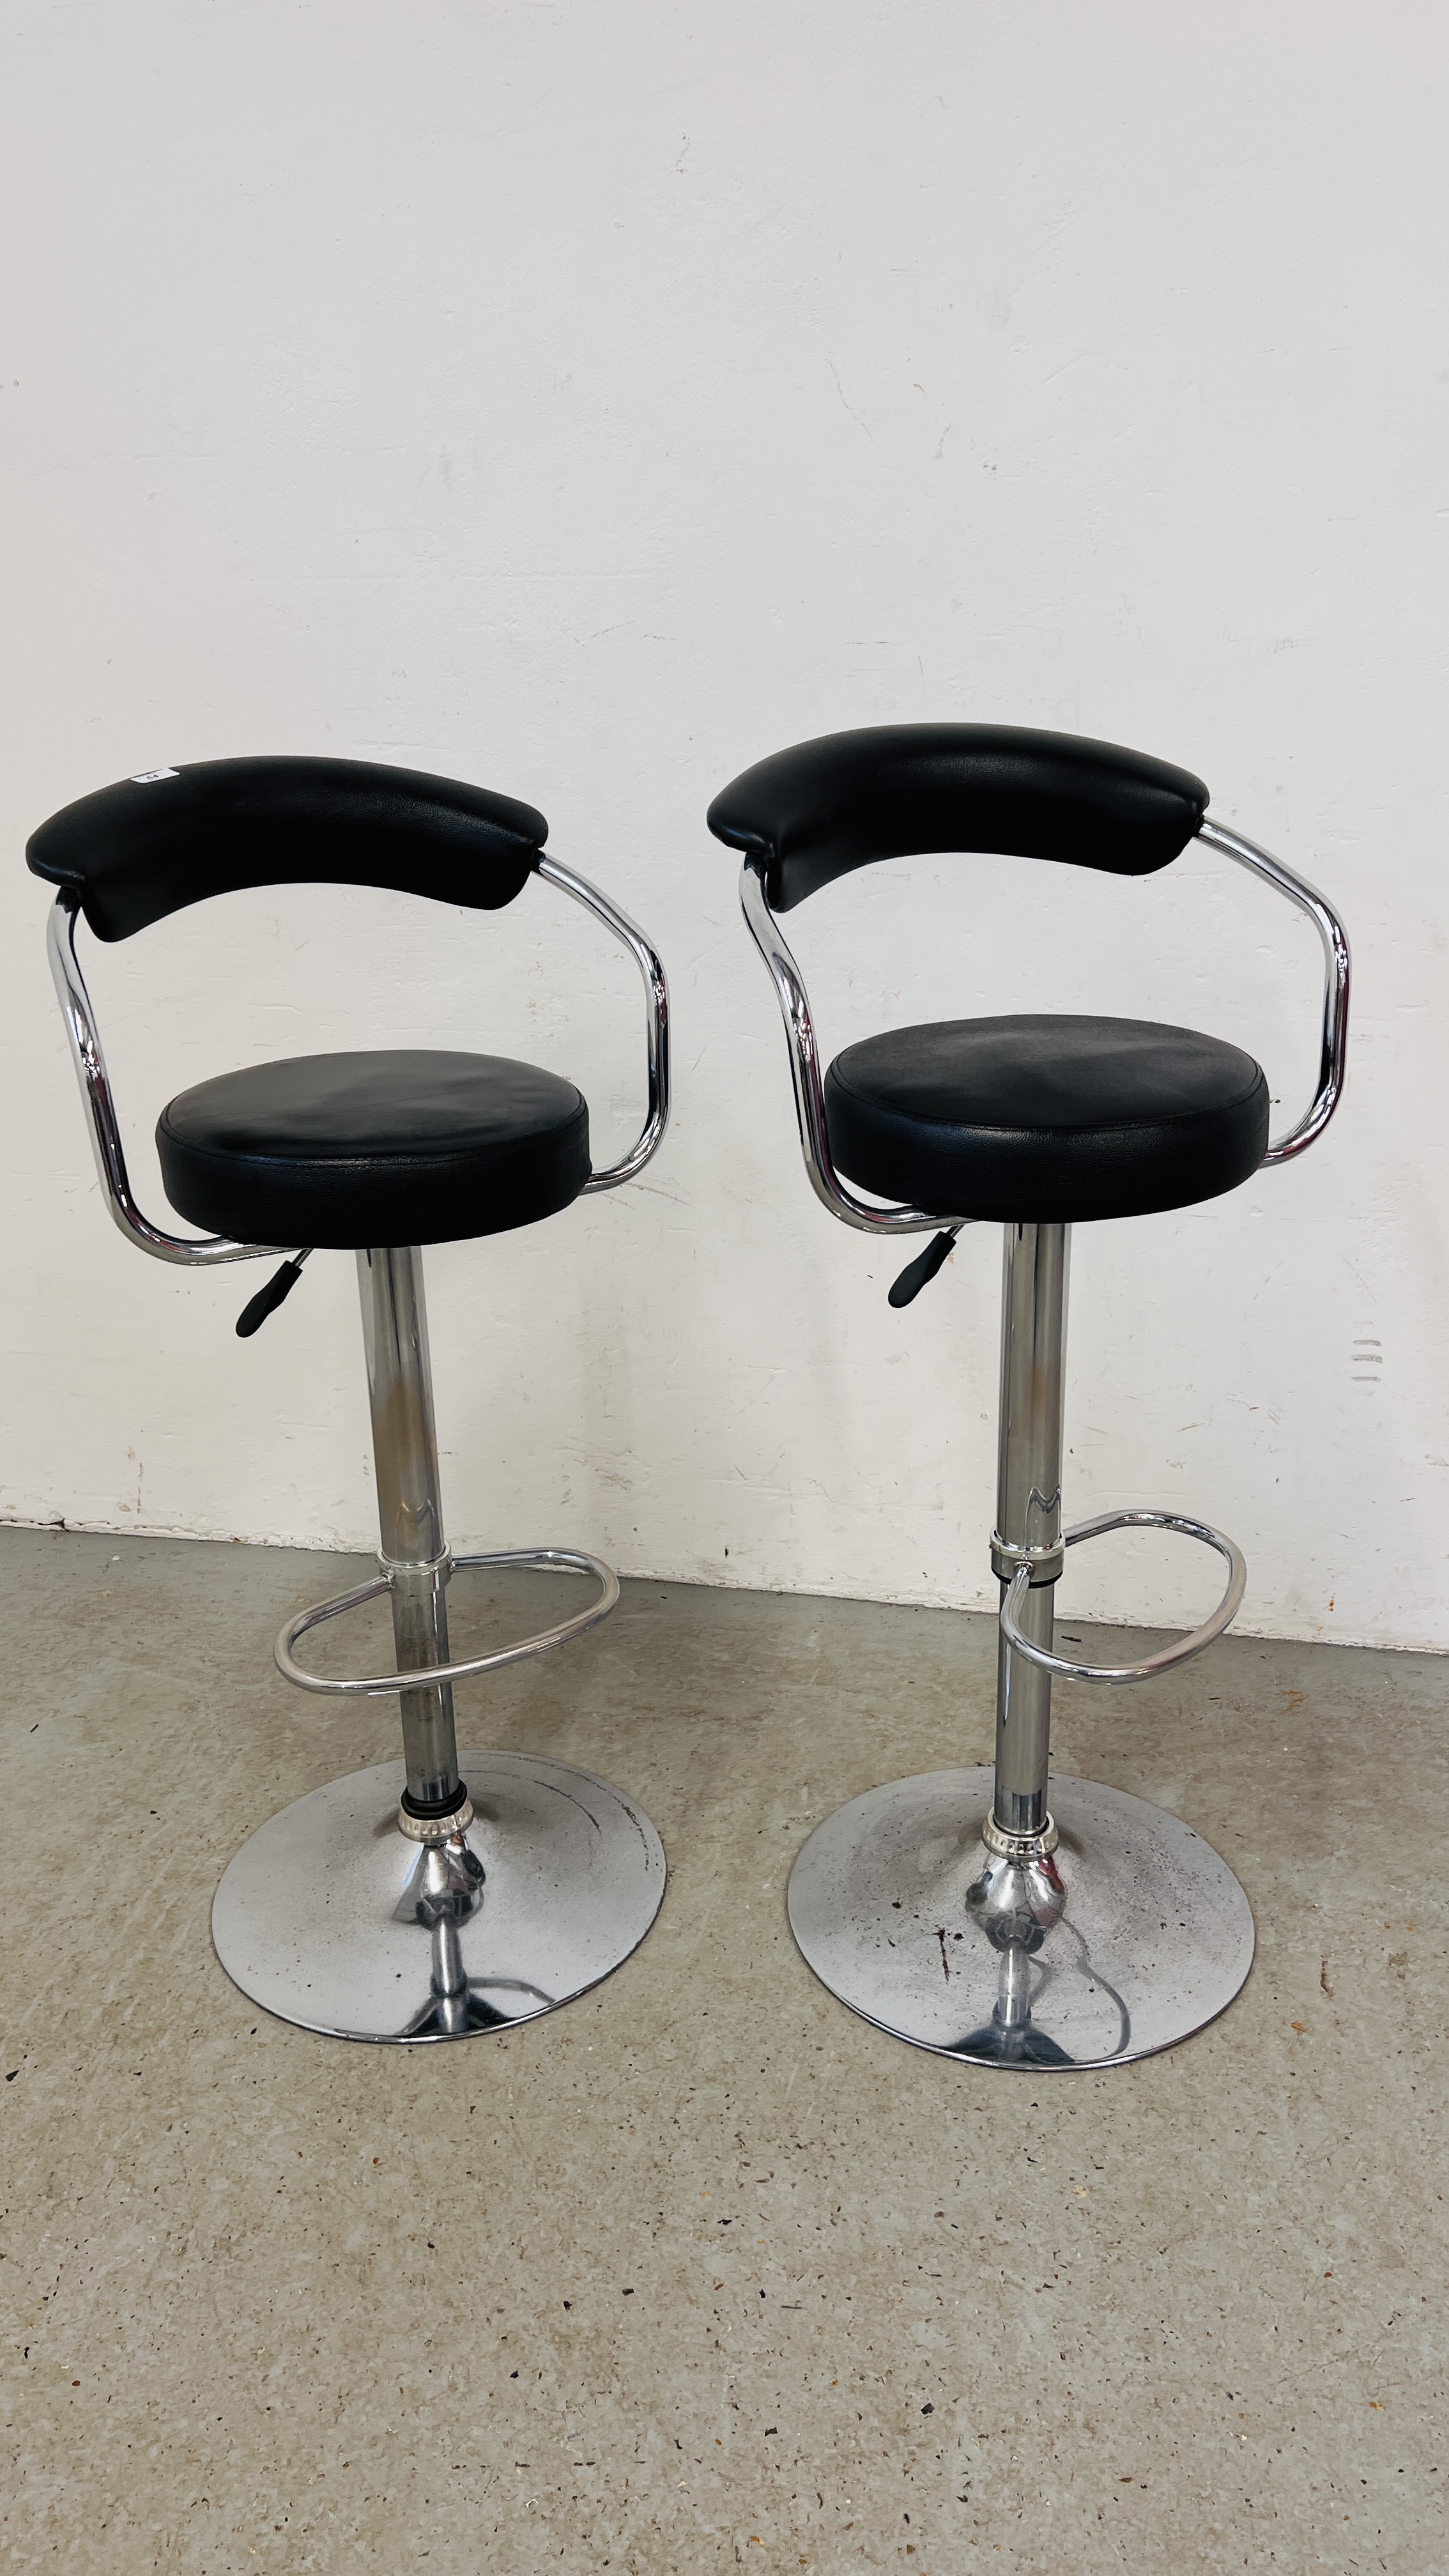 A PAIR OF CHROME FINISH RISE AND FALL BAR STOOLS